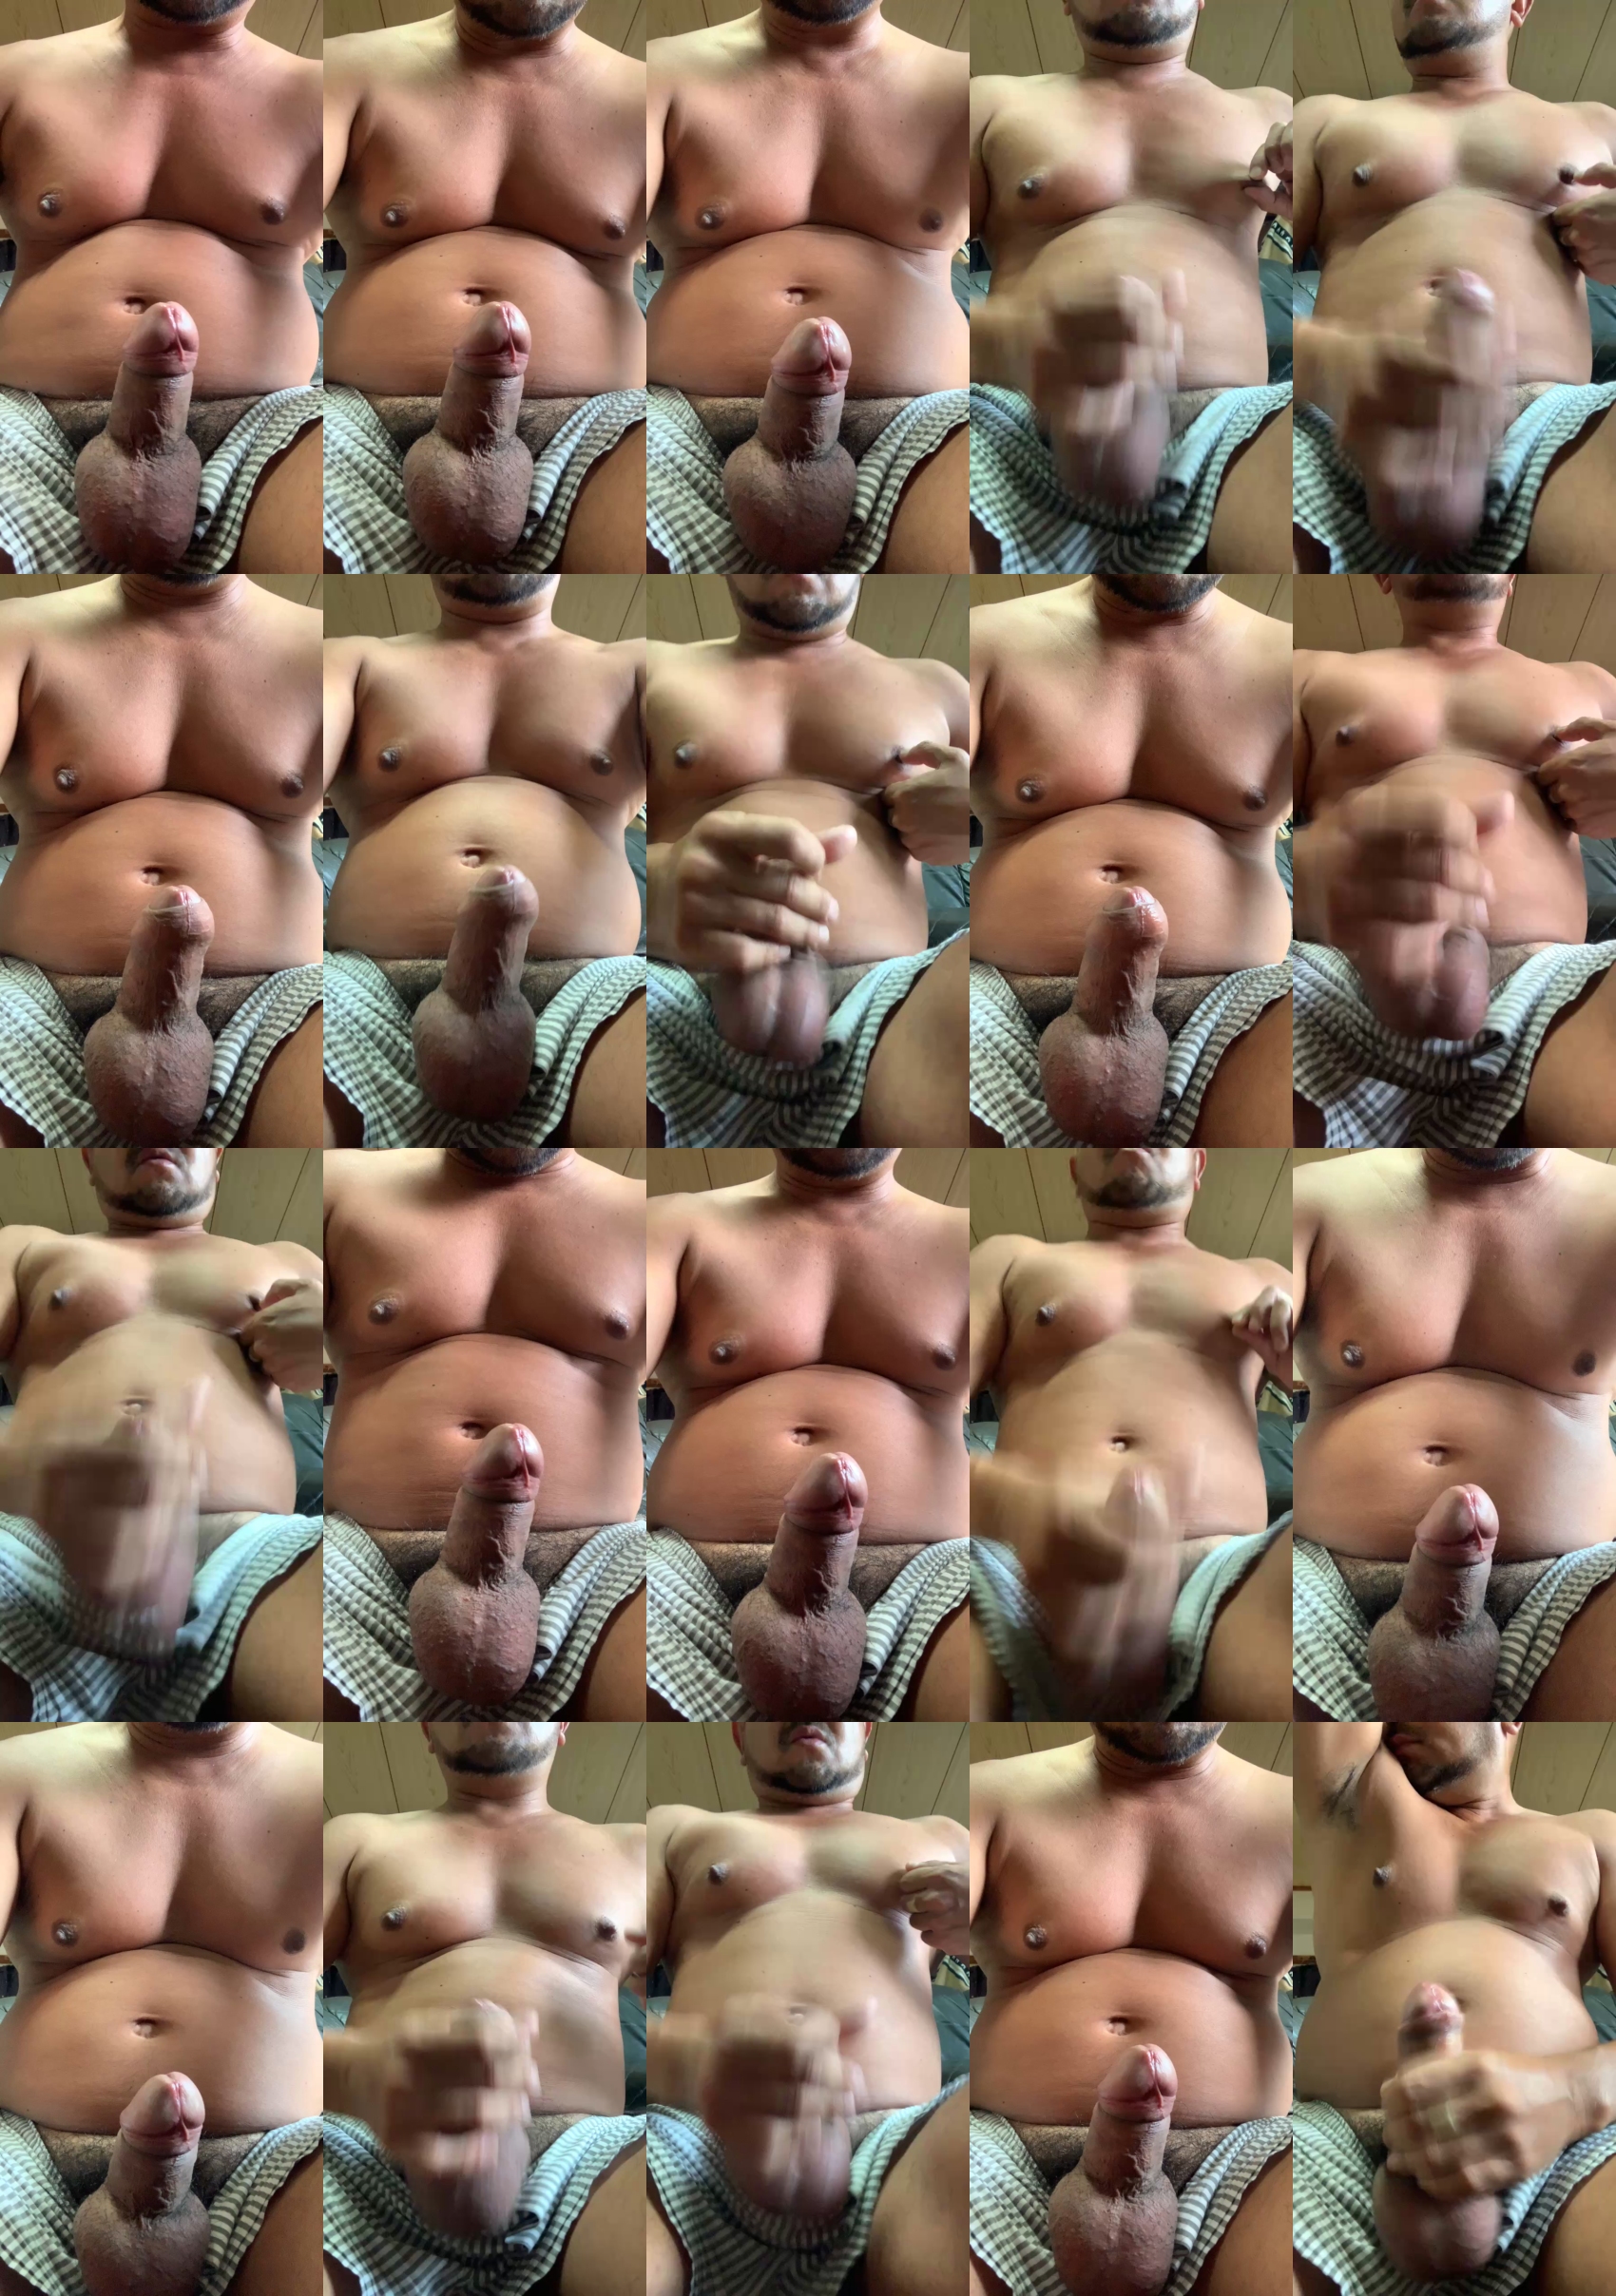 gatsby1  13-08-2022 Recorded Video bigcock